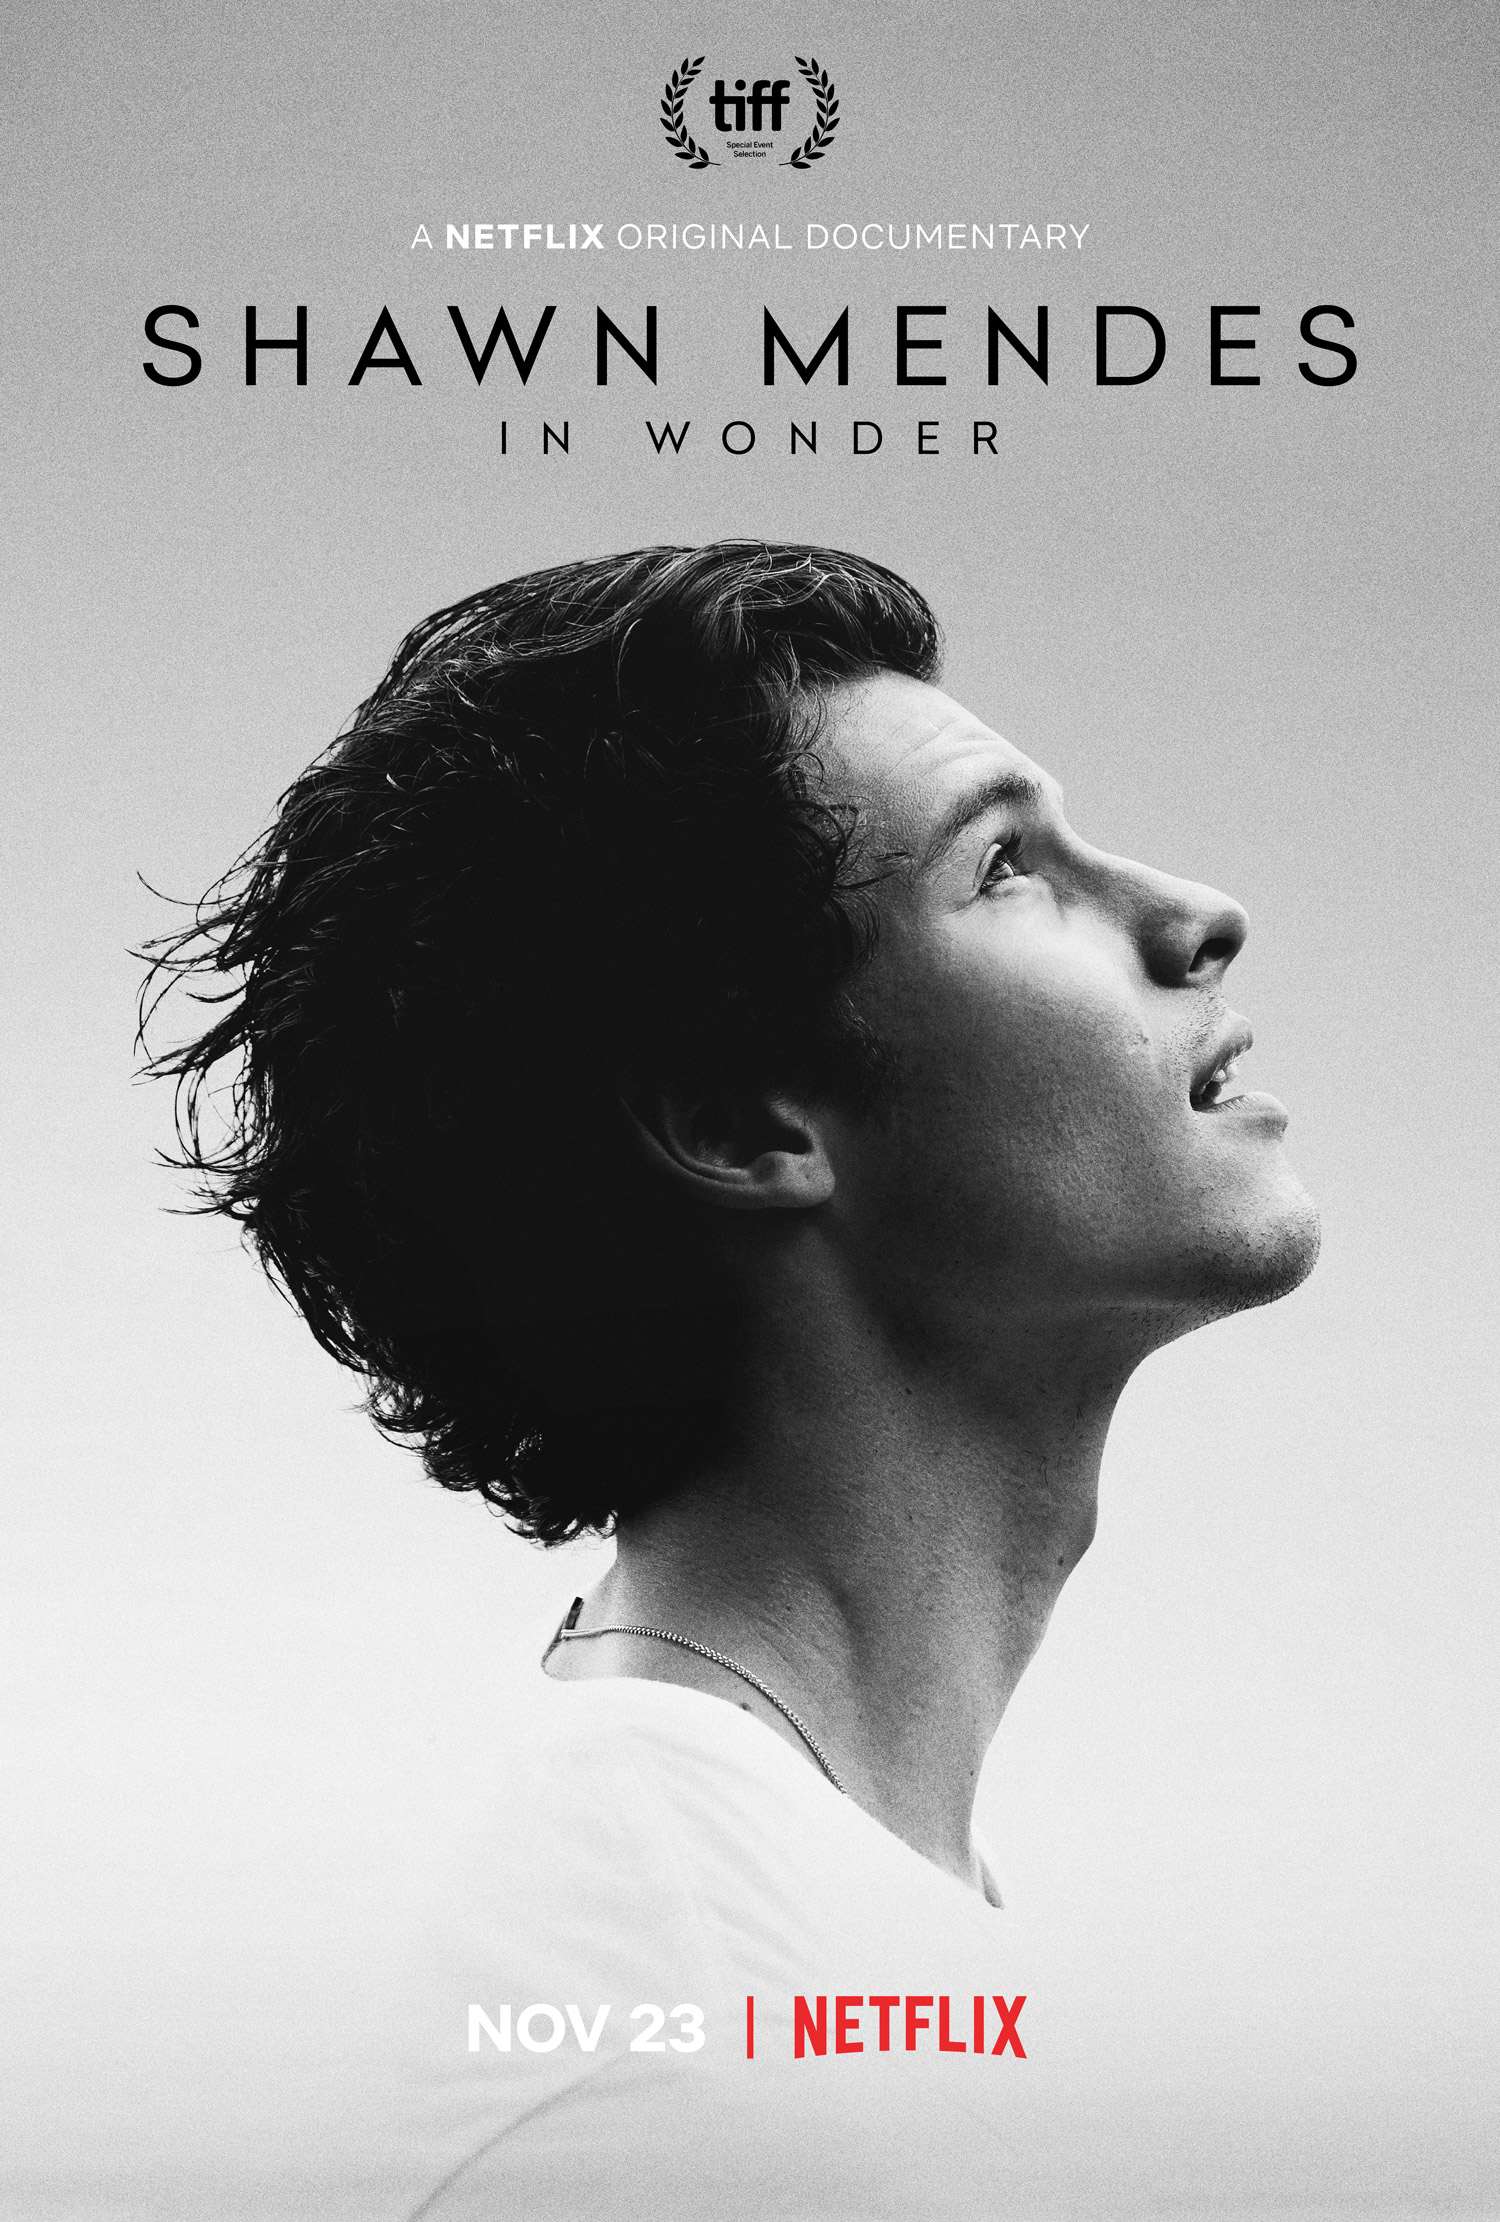 Shawn Mendes Netflix Documentary In Wonder 5 Things We Learned